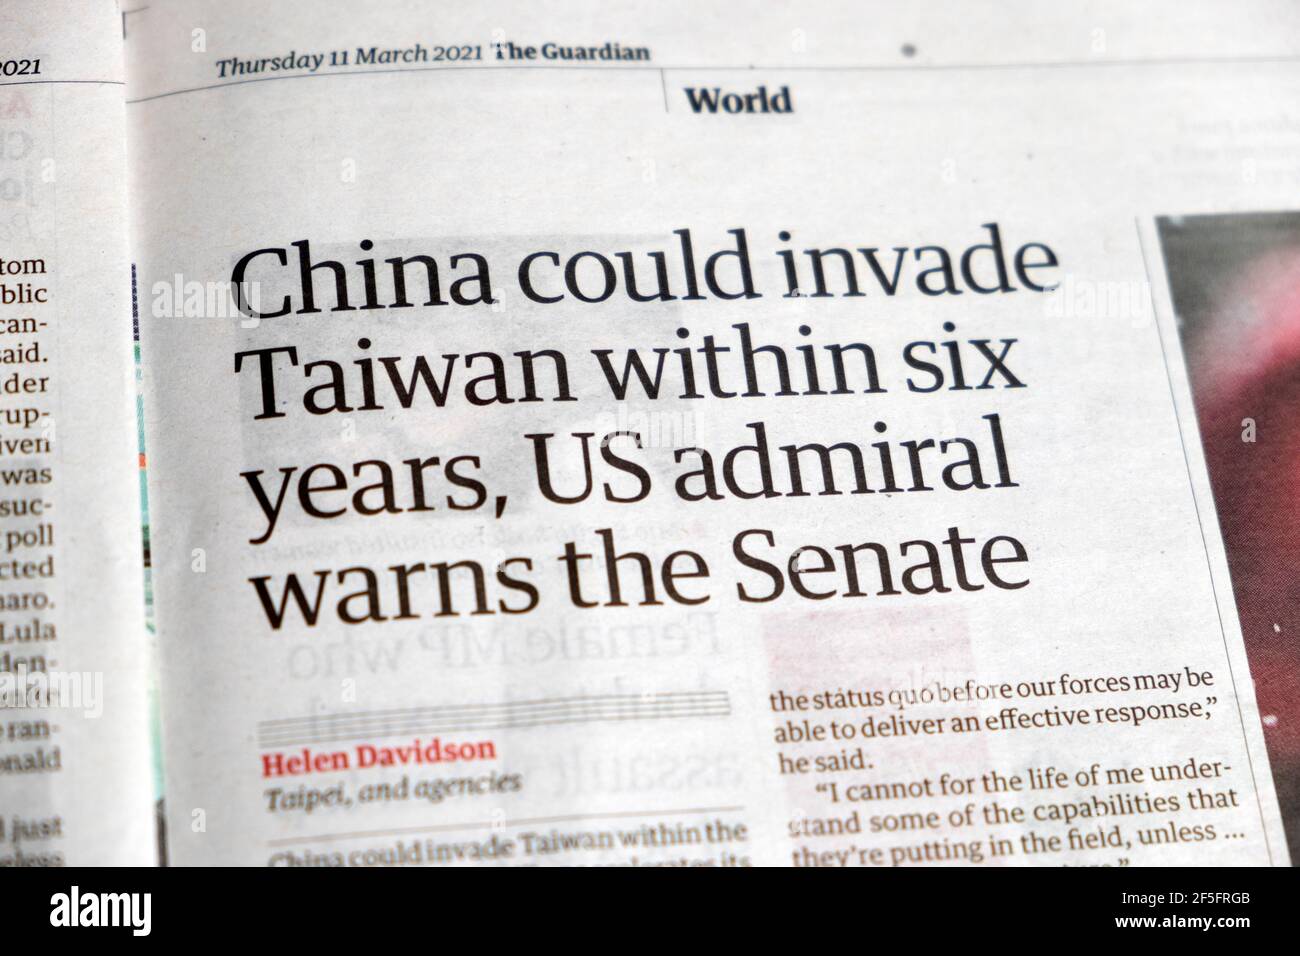 'China could invade Taiwan within six years, US admiral warns the Senate' Guardian newspaper headline political article on 11 March 2021 in London UK Stock Photo